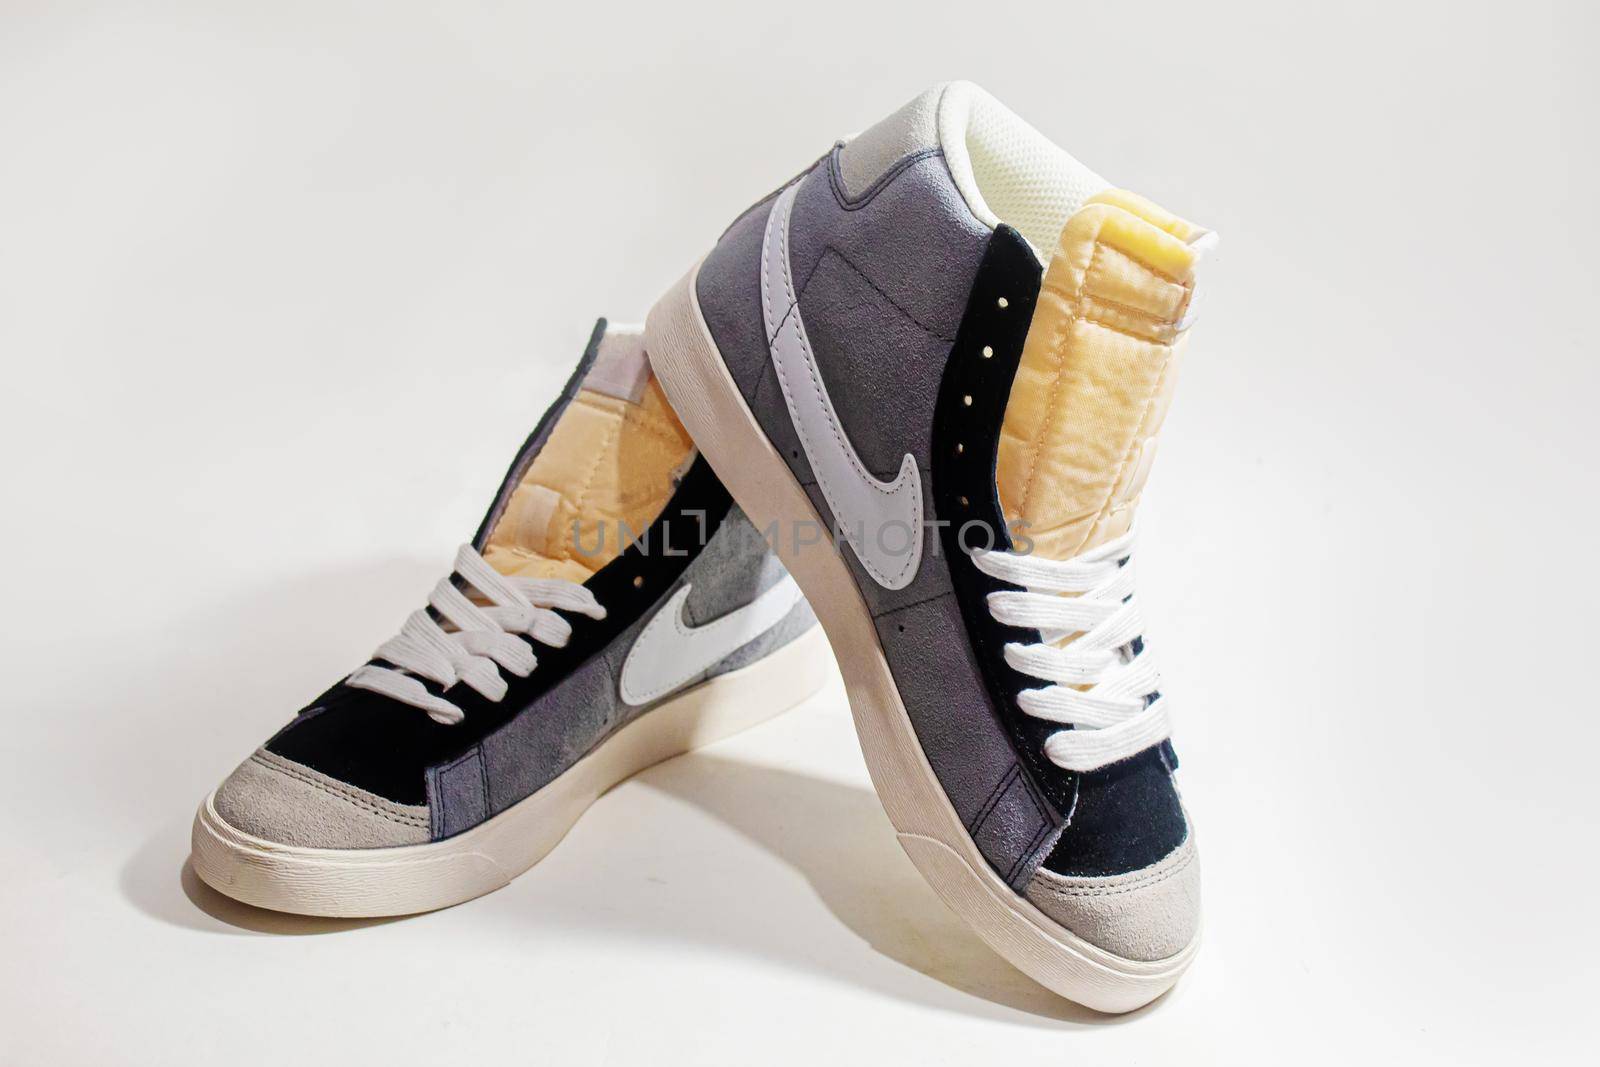 sneakers on white background. selective focus by mila1784